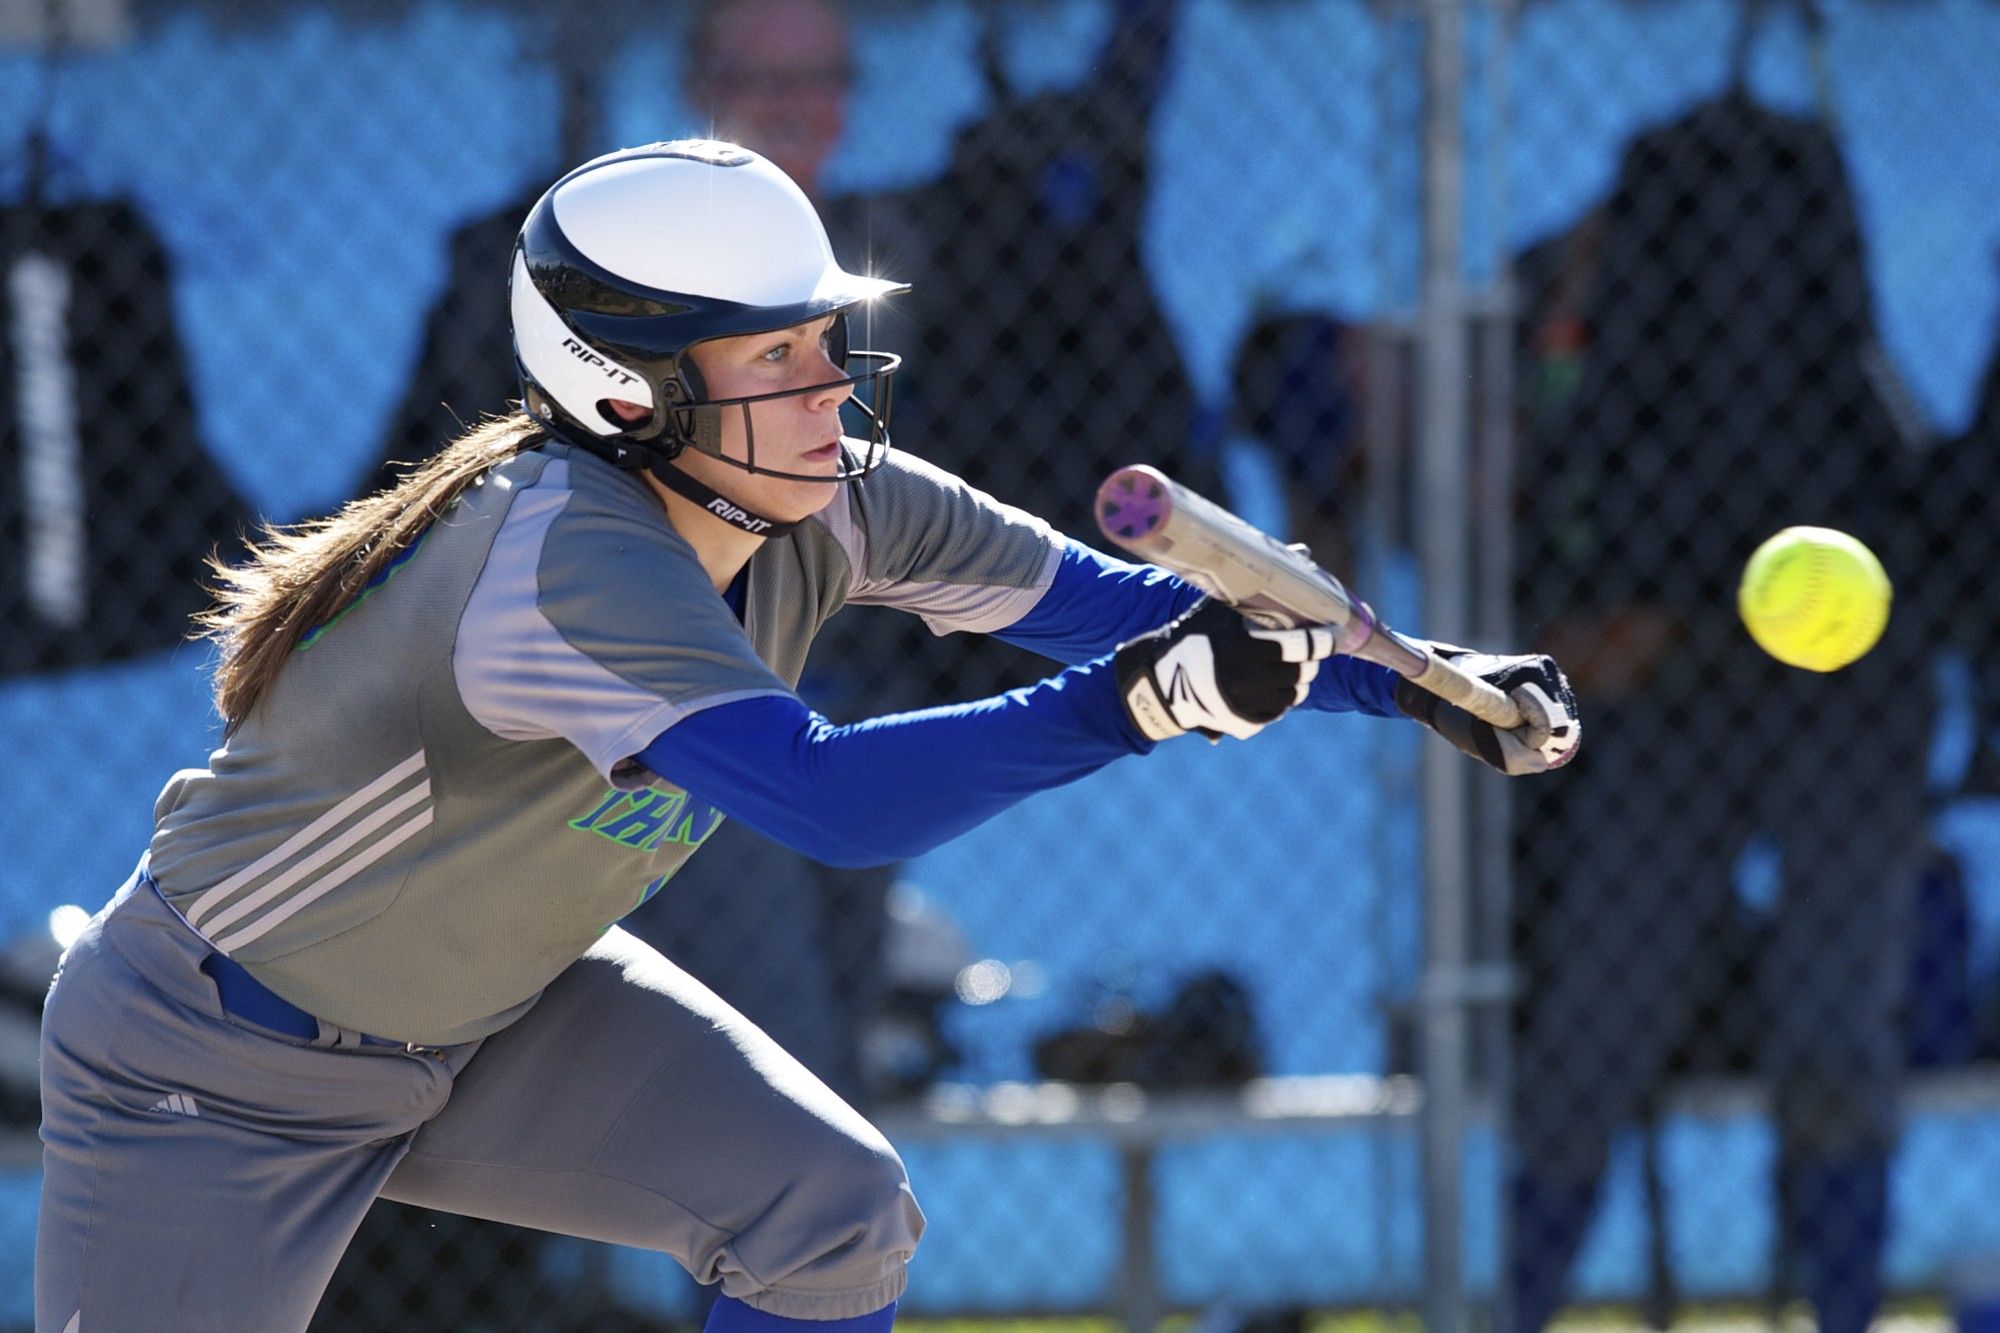 Mountain View softball pitcher Colleen Driscoll's recover has amazed her teammates.